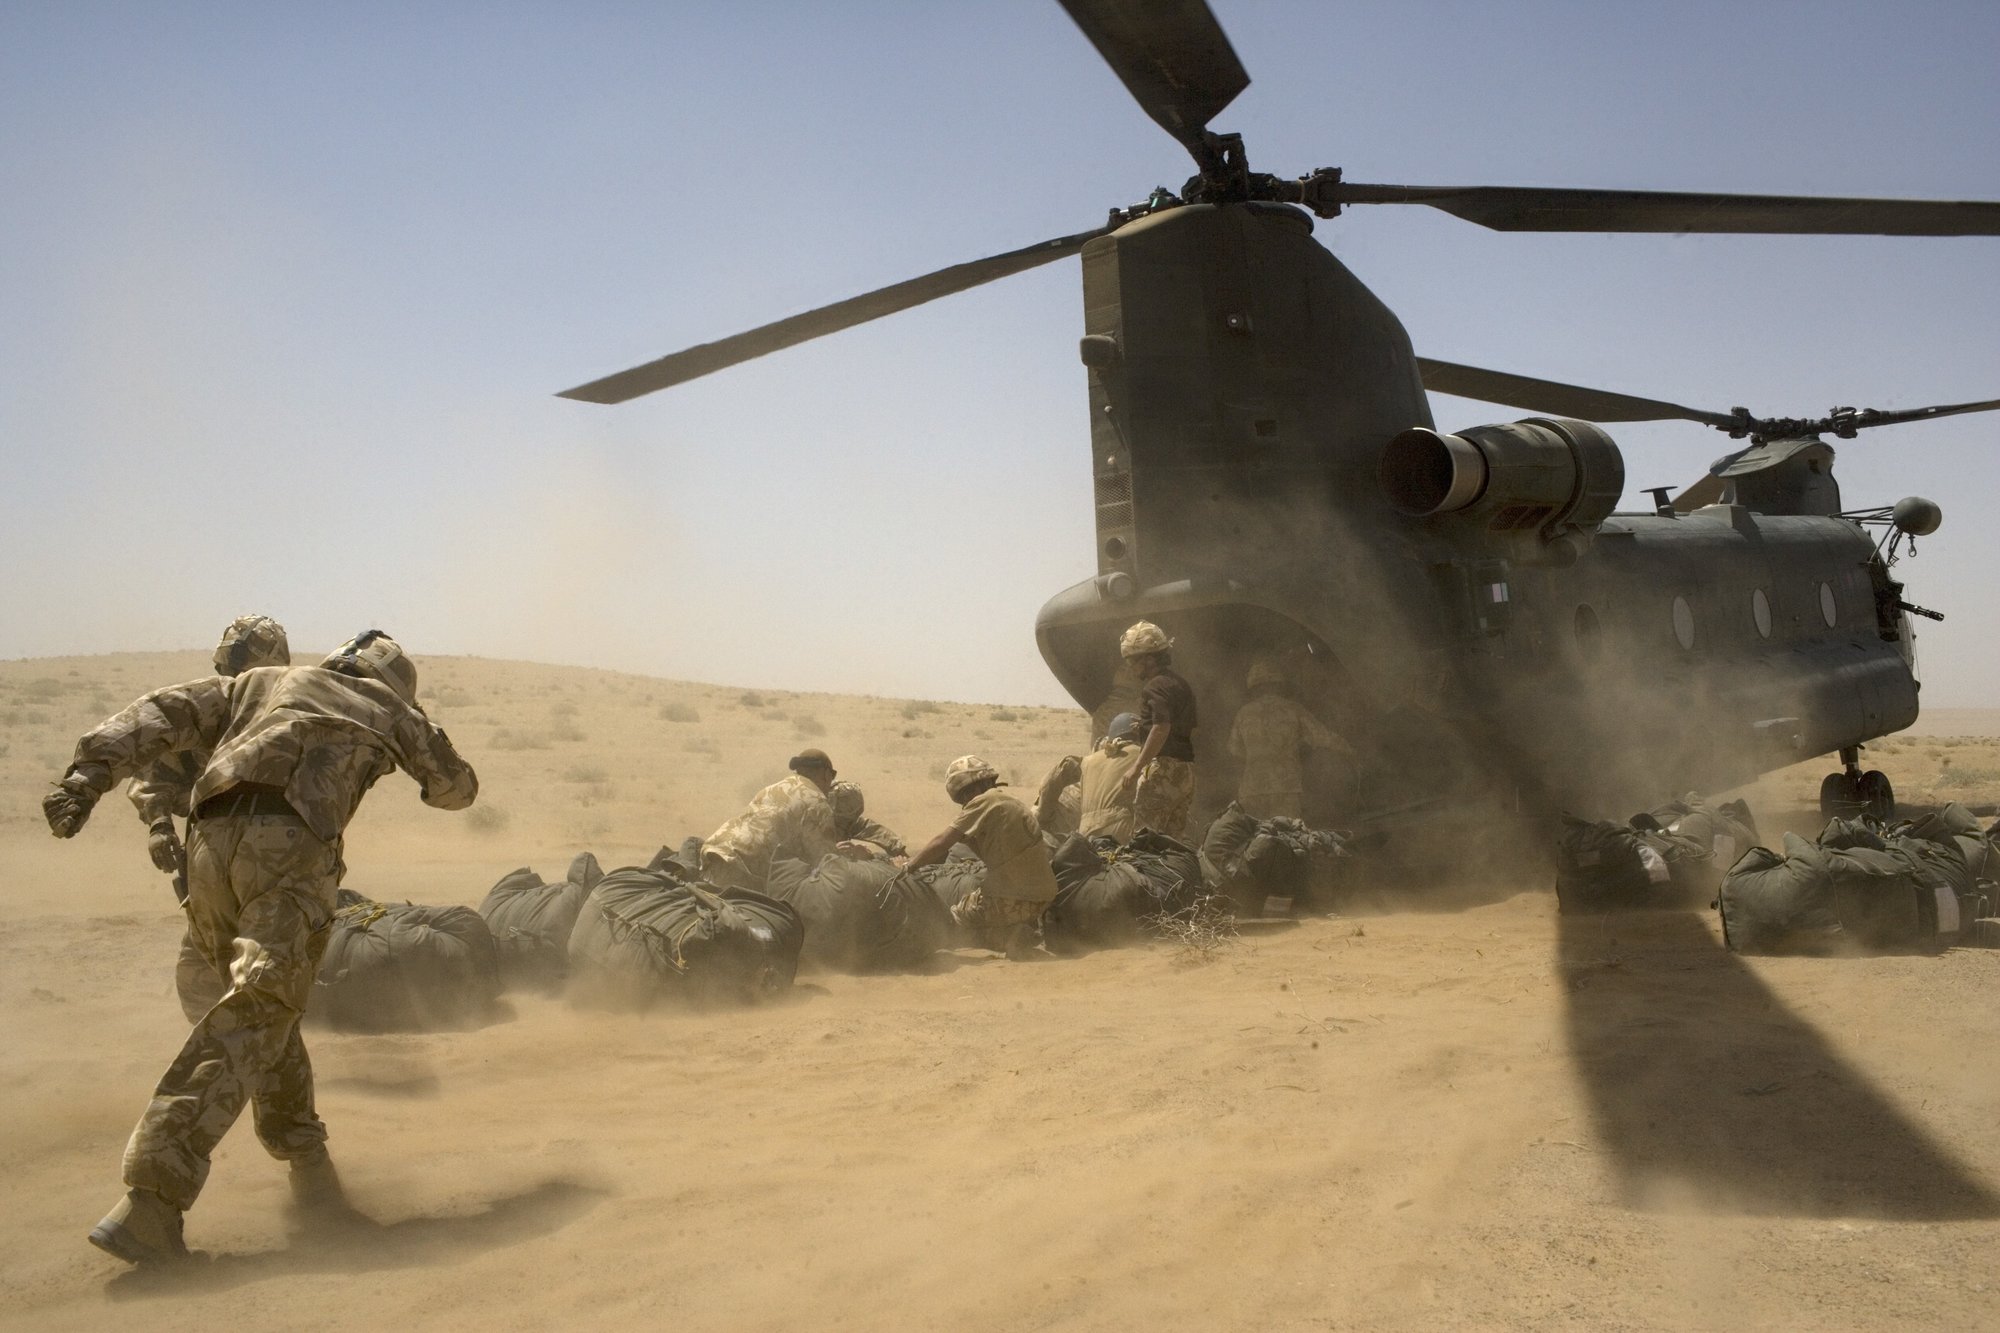 British soldiers load into a Chinook helicopter delivering supplies as they camp in a location in the desert to conduct counter-Taliban operations May 25, 2007, in southern Helmand province, Afghanistan. Photo by Marco Di Lauro via Getty Images.